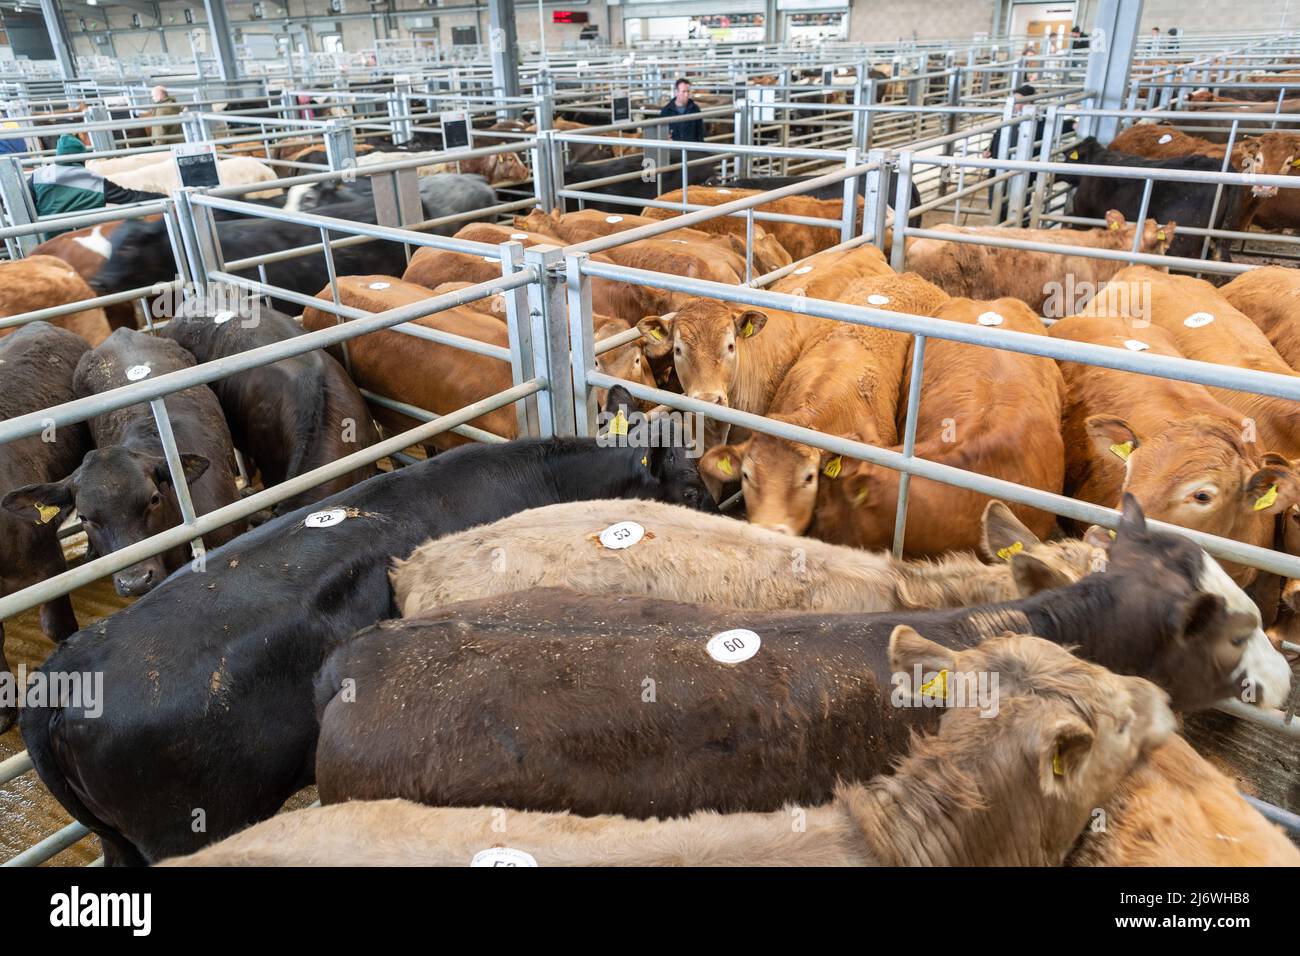 Pens of beef cattle at a livestock Auction market in Cumbria, UK. Stock Photo